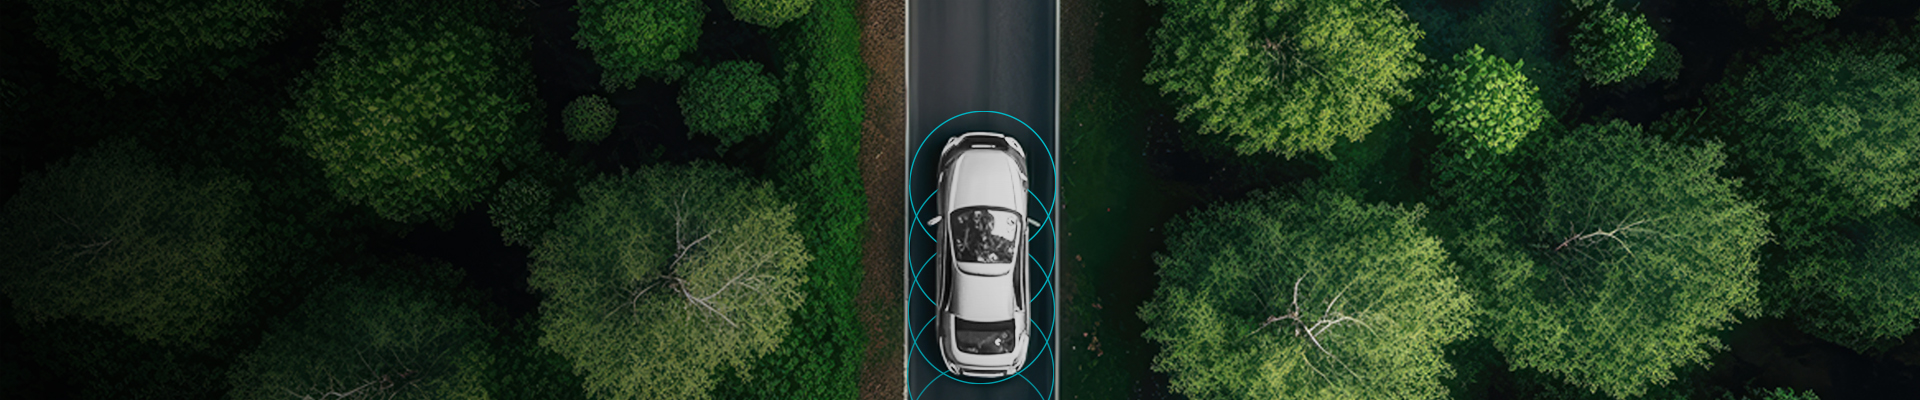 Enabling a Digital Driving Experience with End-to-End Cyber Security